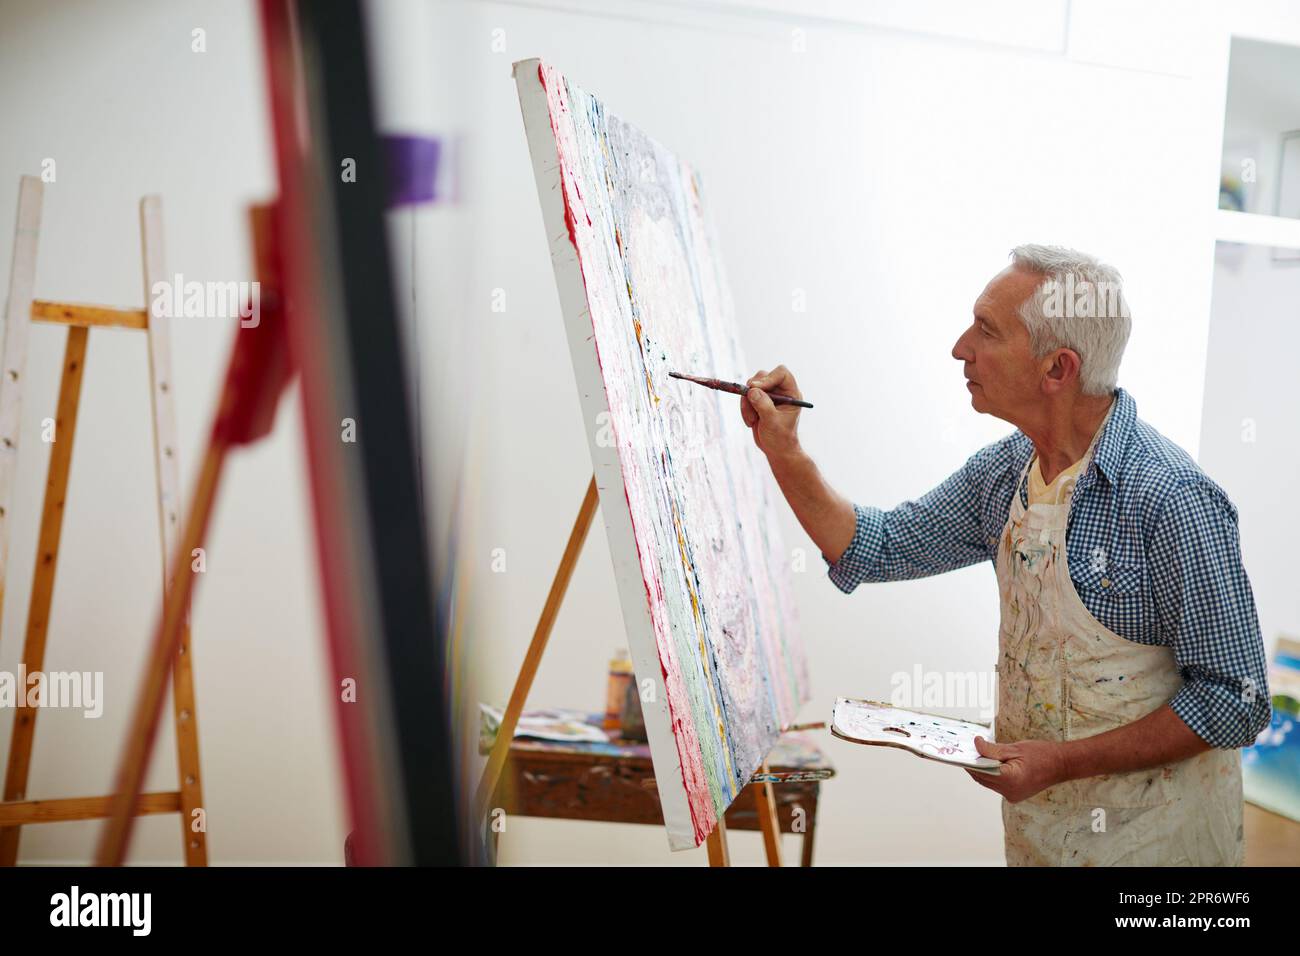 Makers gonna make. Shot of a senior man working on a painting at home. Stock Photo